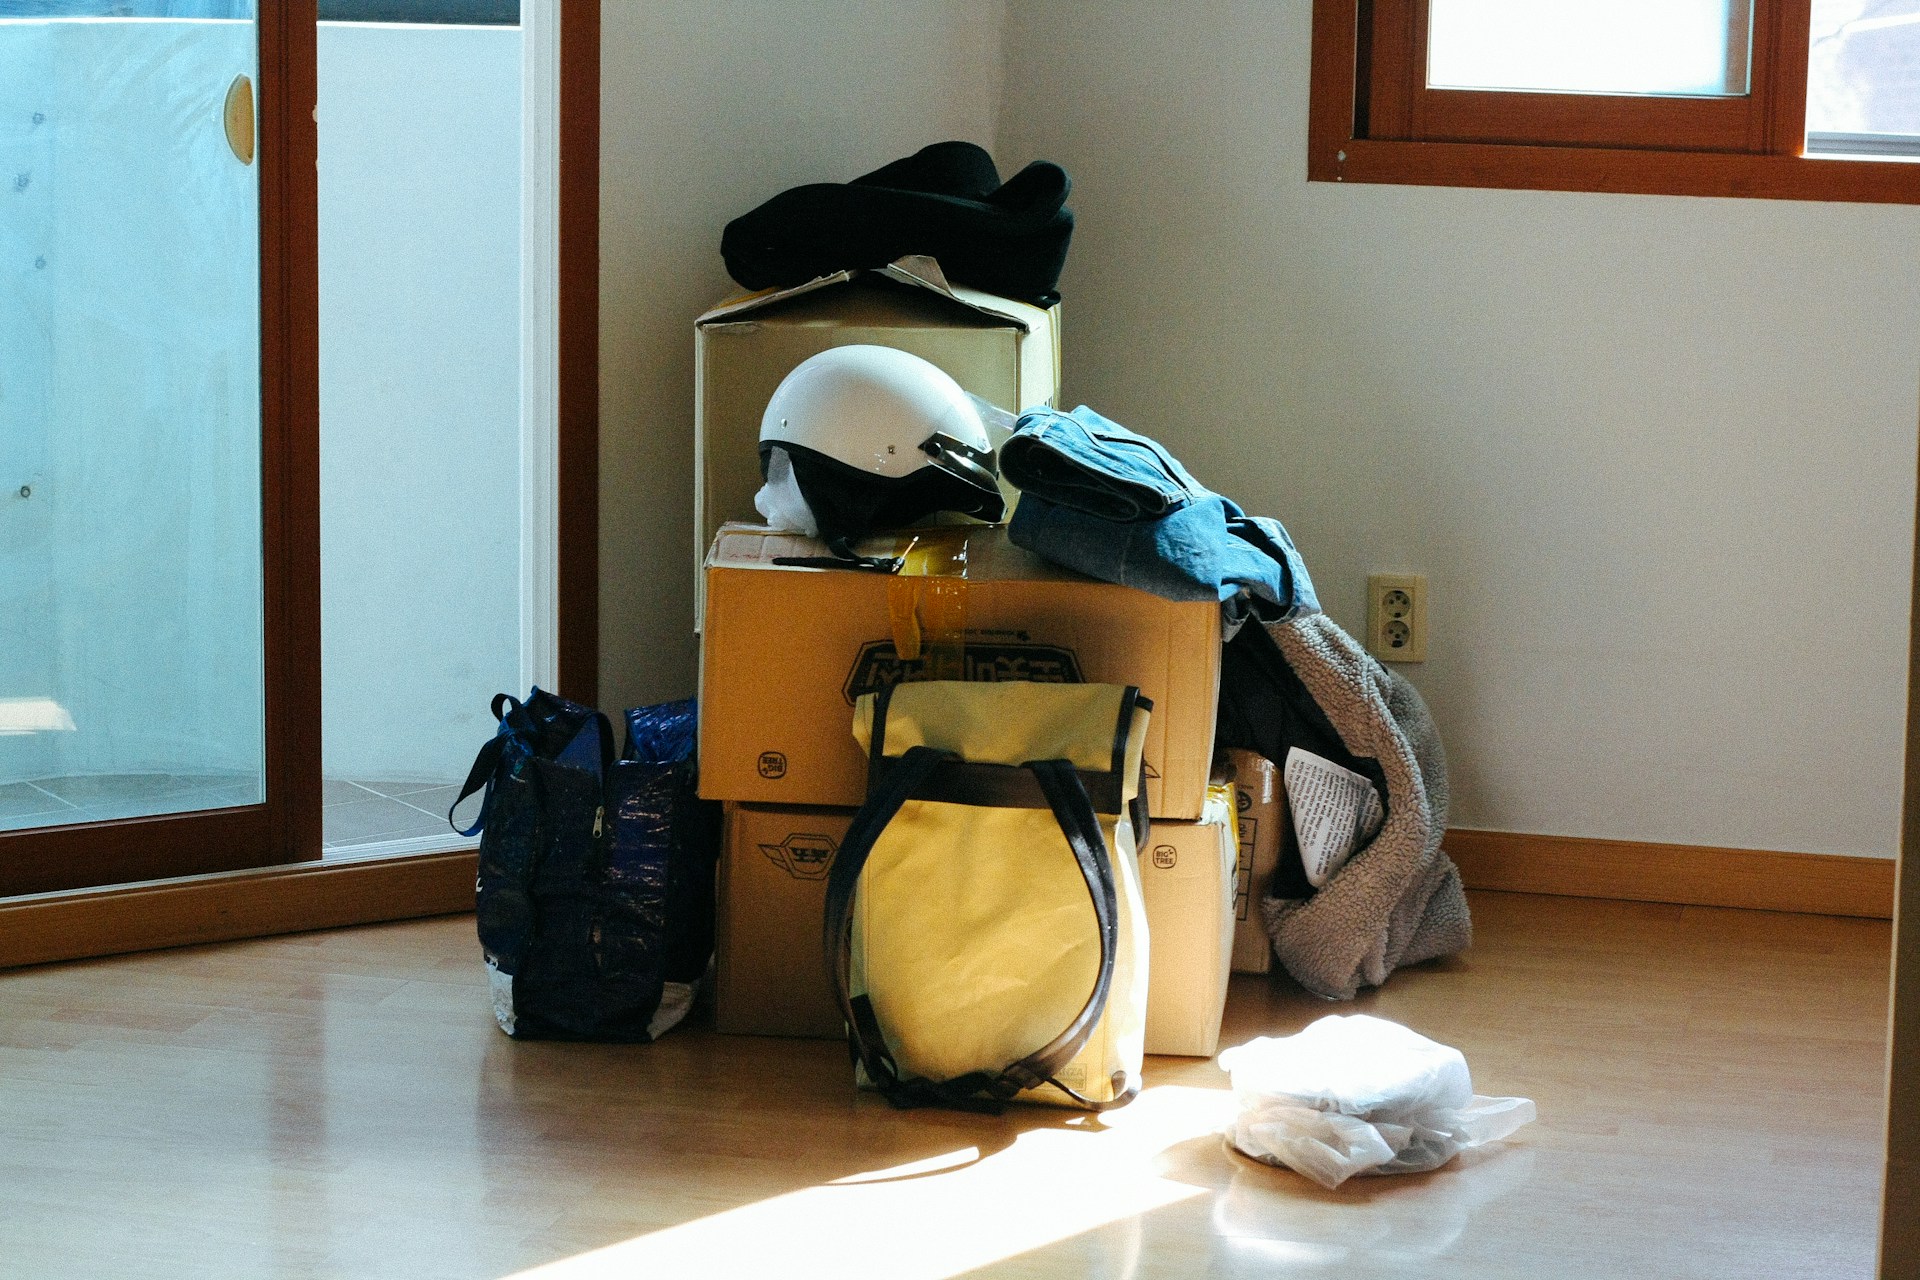 boxes, bags and a helmet on the floor